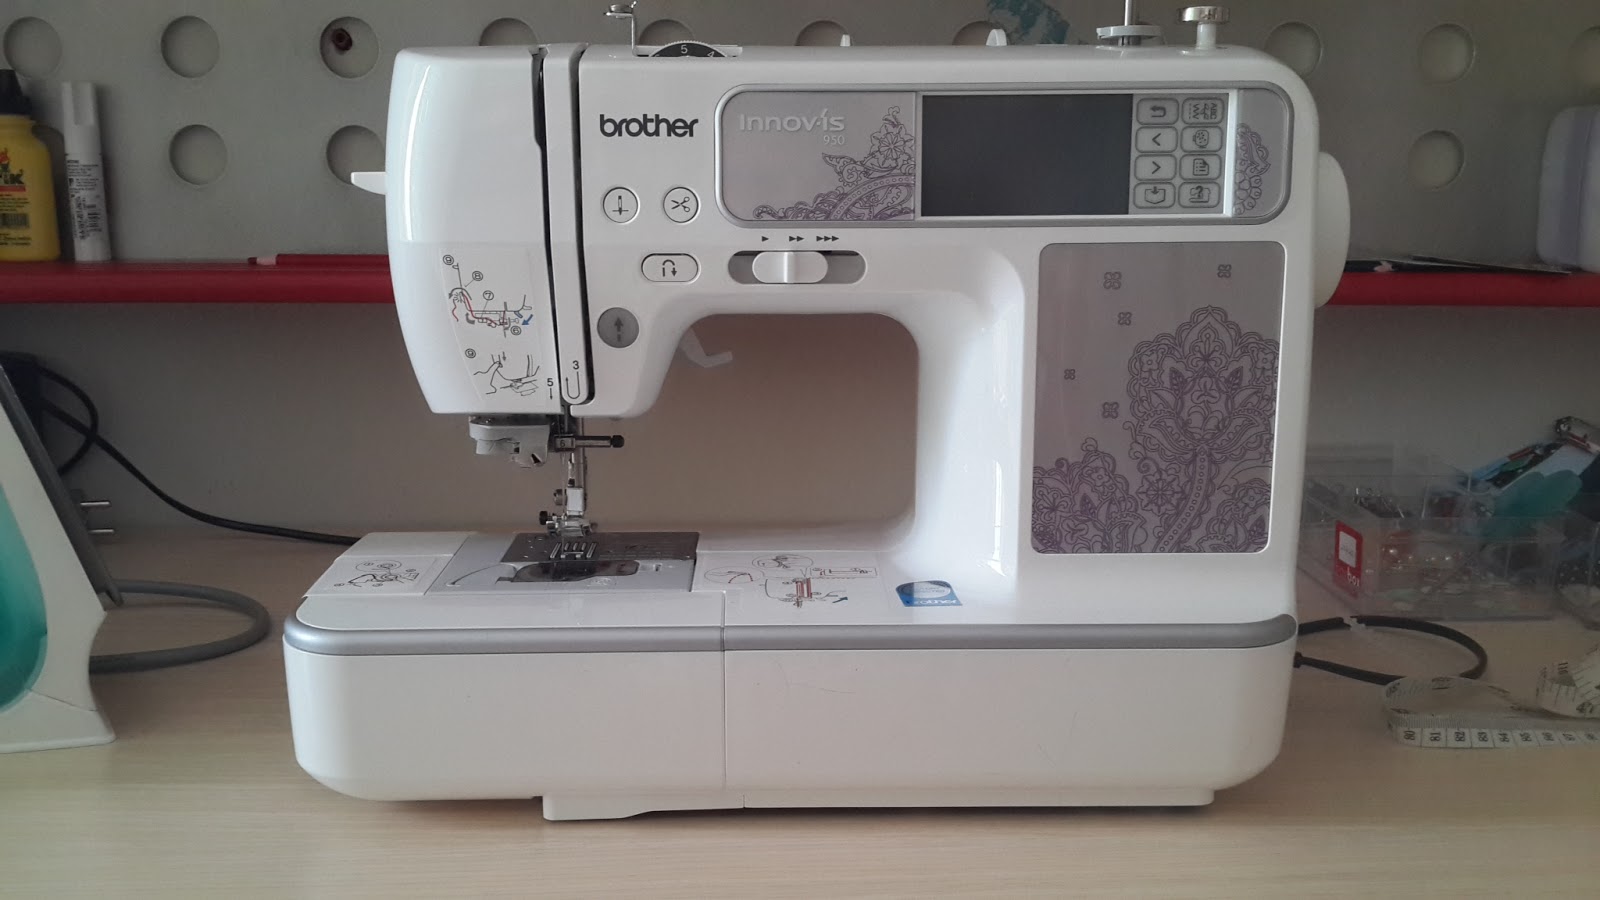 Story of Kimi: My New Passion - Sewing